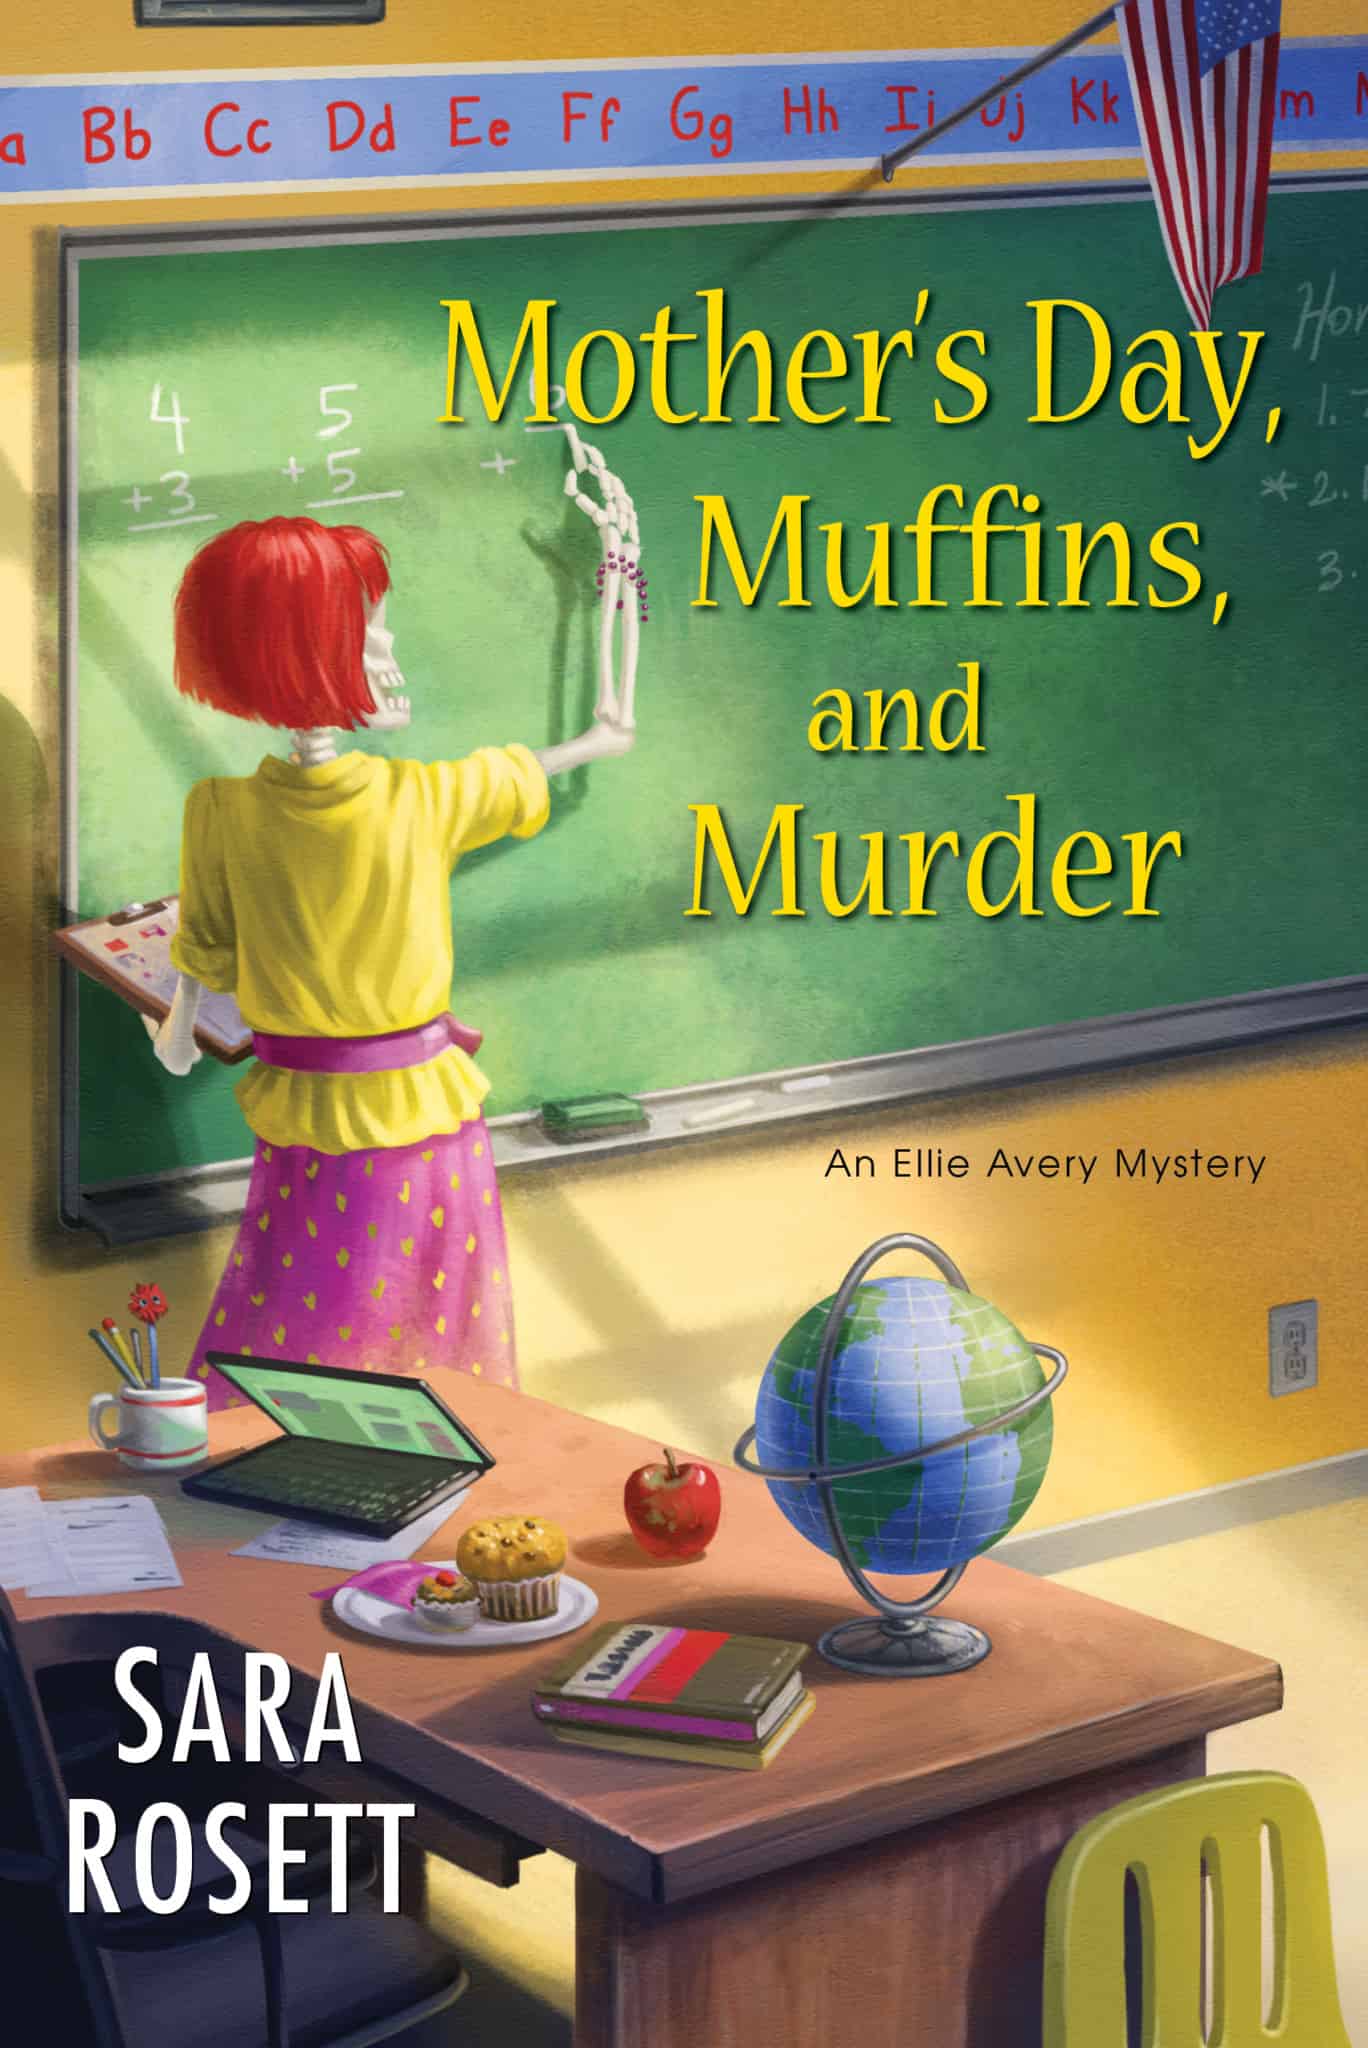 Mother’s Day, Muffins, and Murder by Sara Rosett